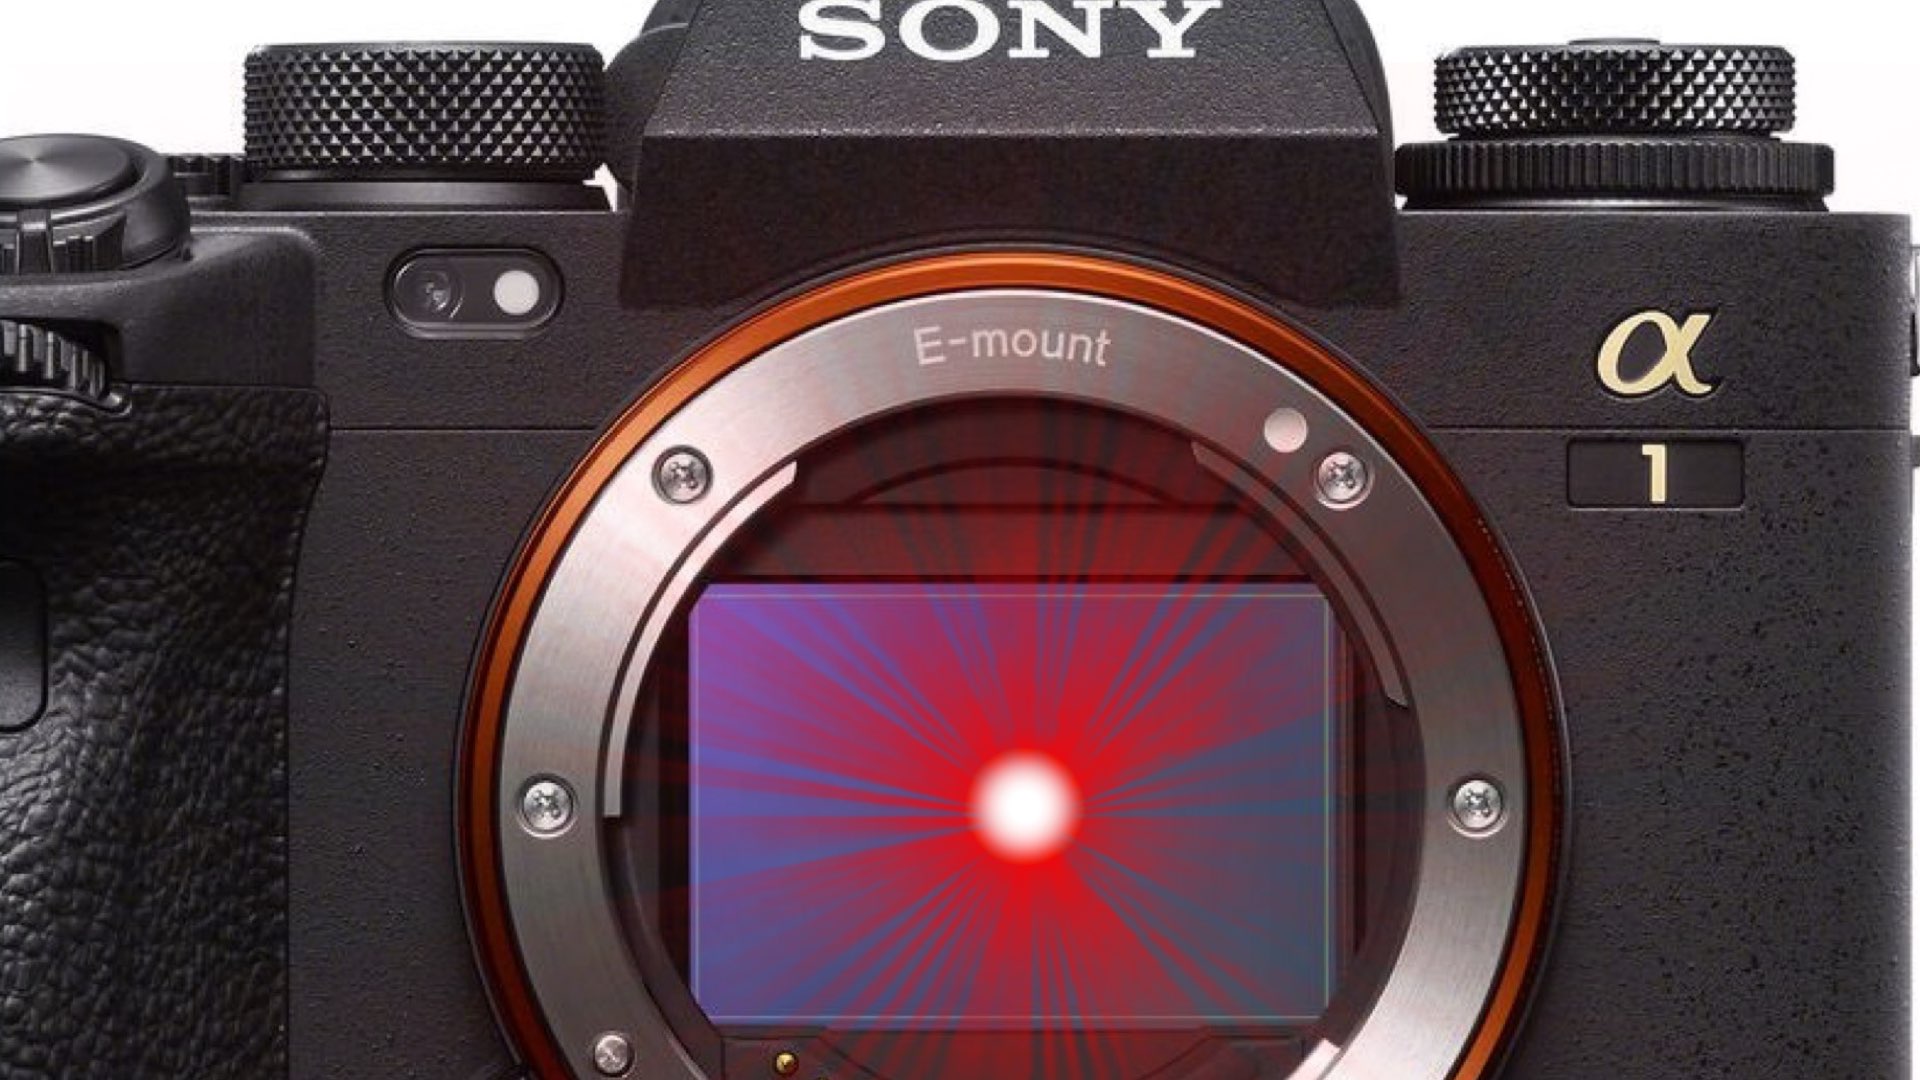 Sony Says: “Do not directly expose the lens to laser beams”